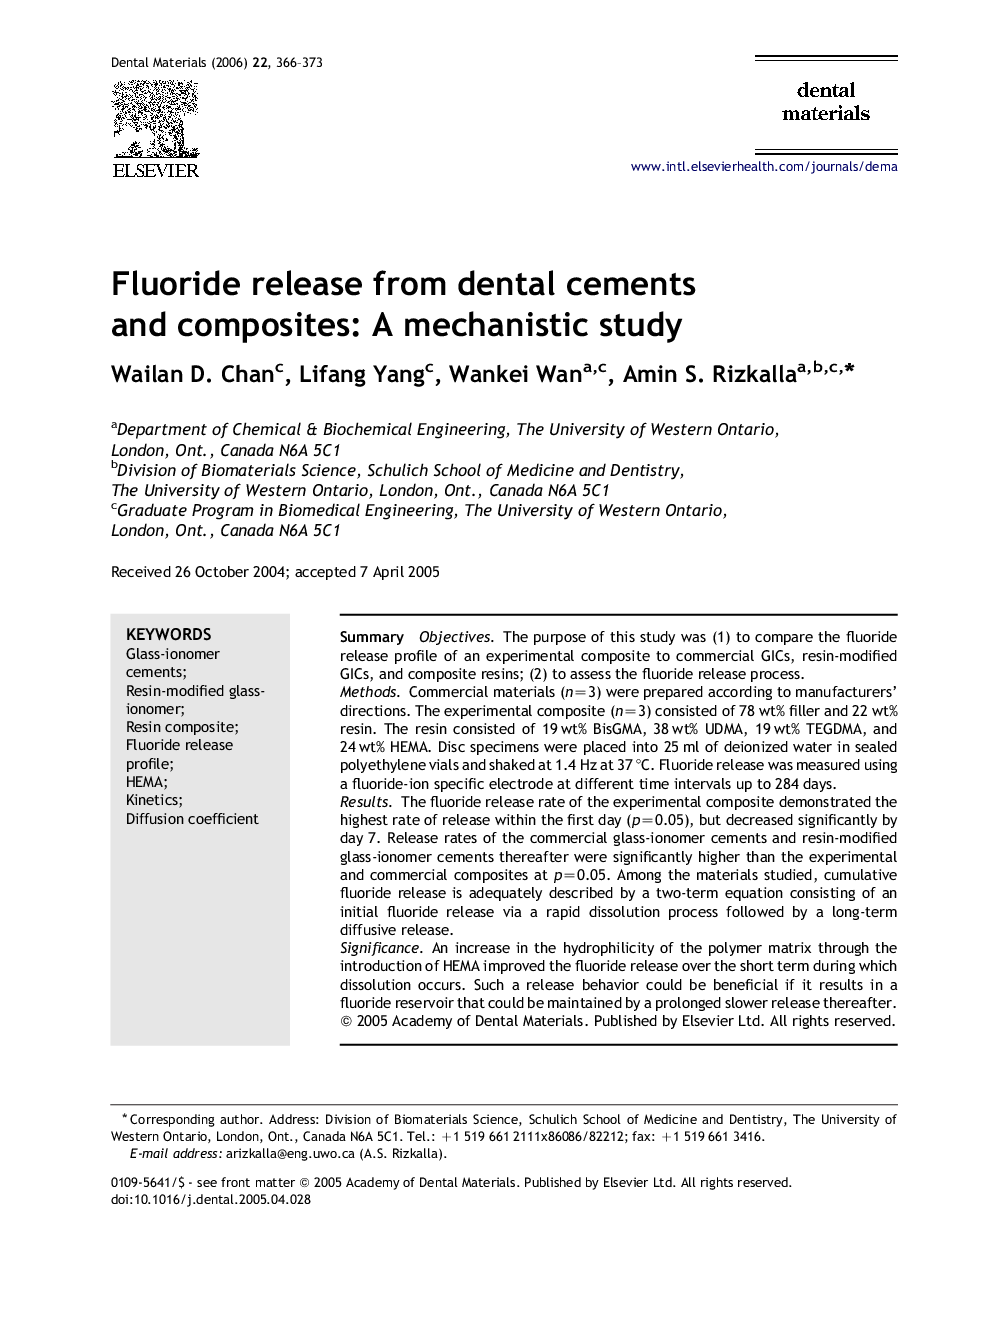 Fluoride release from dental cements and composites: A mechanistic study